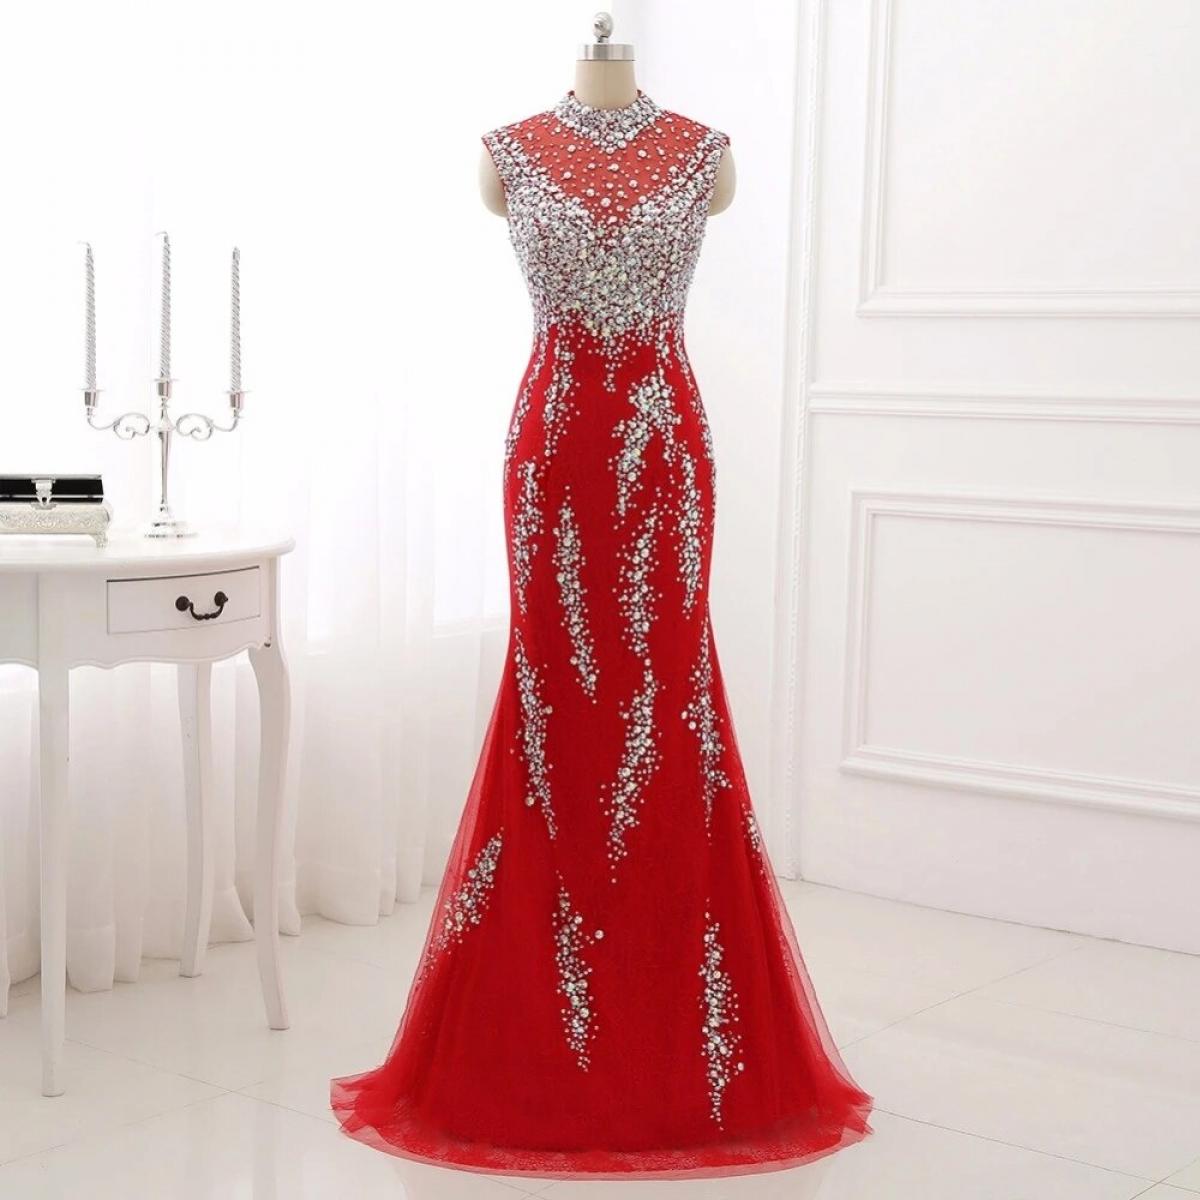 Luxury Lace Evening Dresses Mermaid  New Arrival Beaded Beads Crystal Sheer Neck Formal Occasion Prom Party Gownevening 